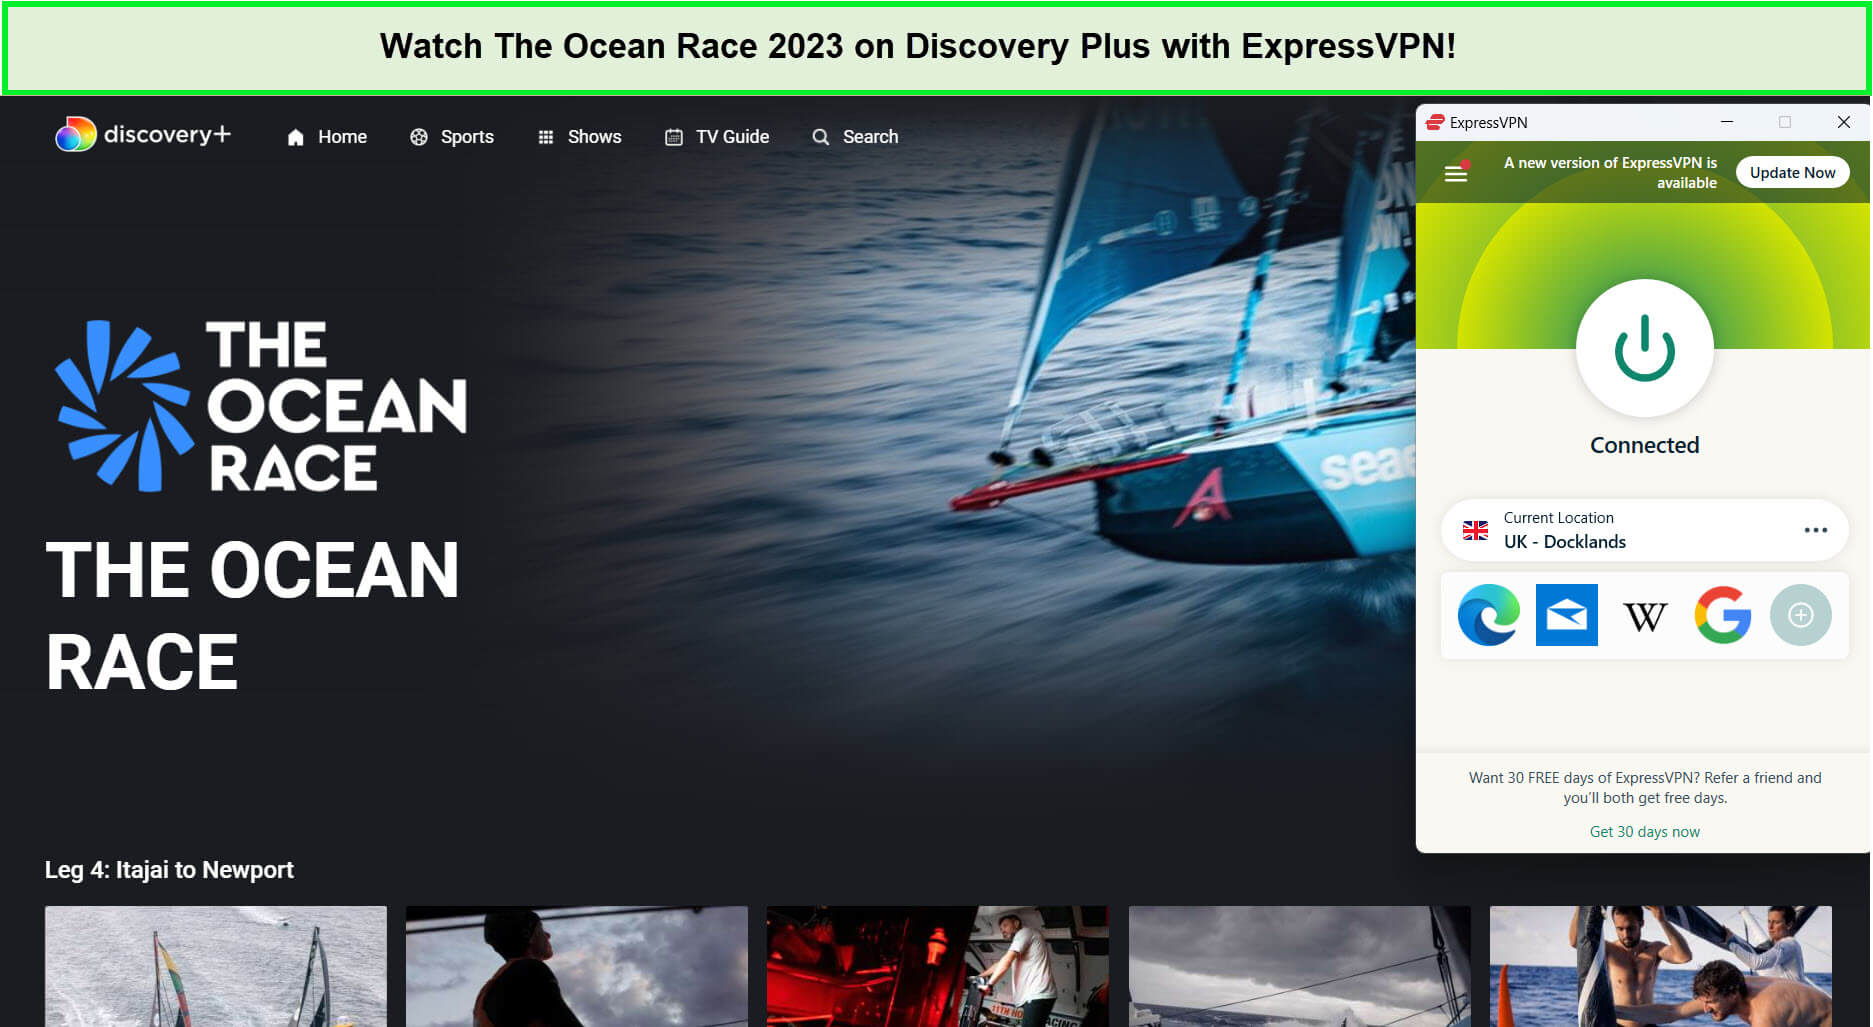 expressvpn-unblocks-the-ocean-race-2023-live-in-Hong Kong-on-discovery-plus